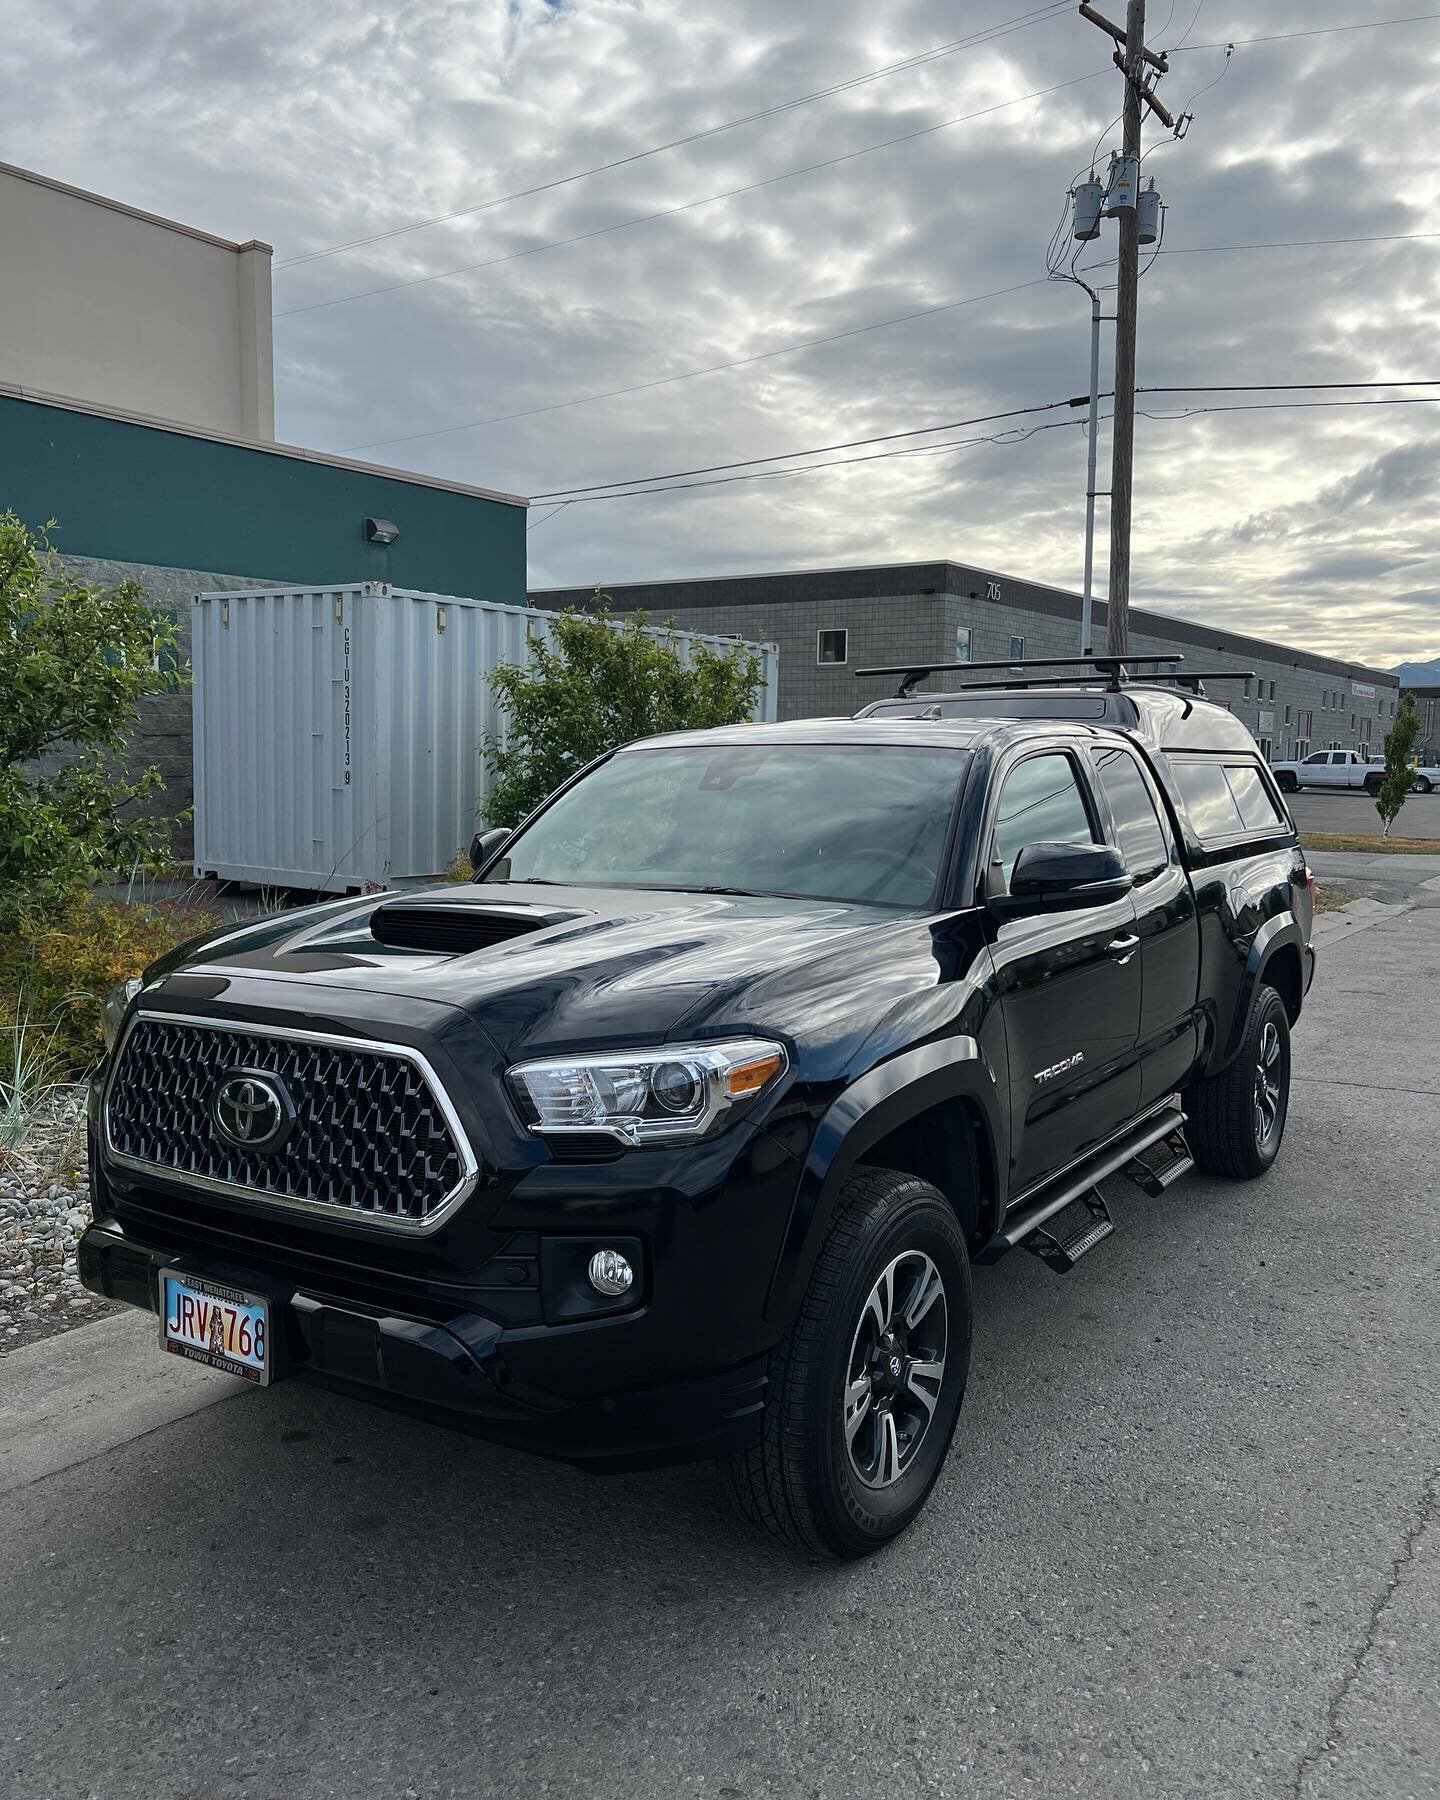 This tacoma is looking a lot better after a paint correction!
.
.
.
#detailing #paintcorrection #toyota #anchorage #alaska #anchoragealaska #autodetailing #tacoma #rupes